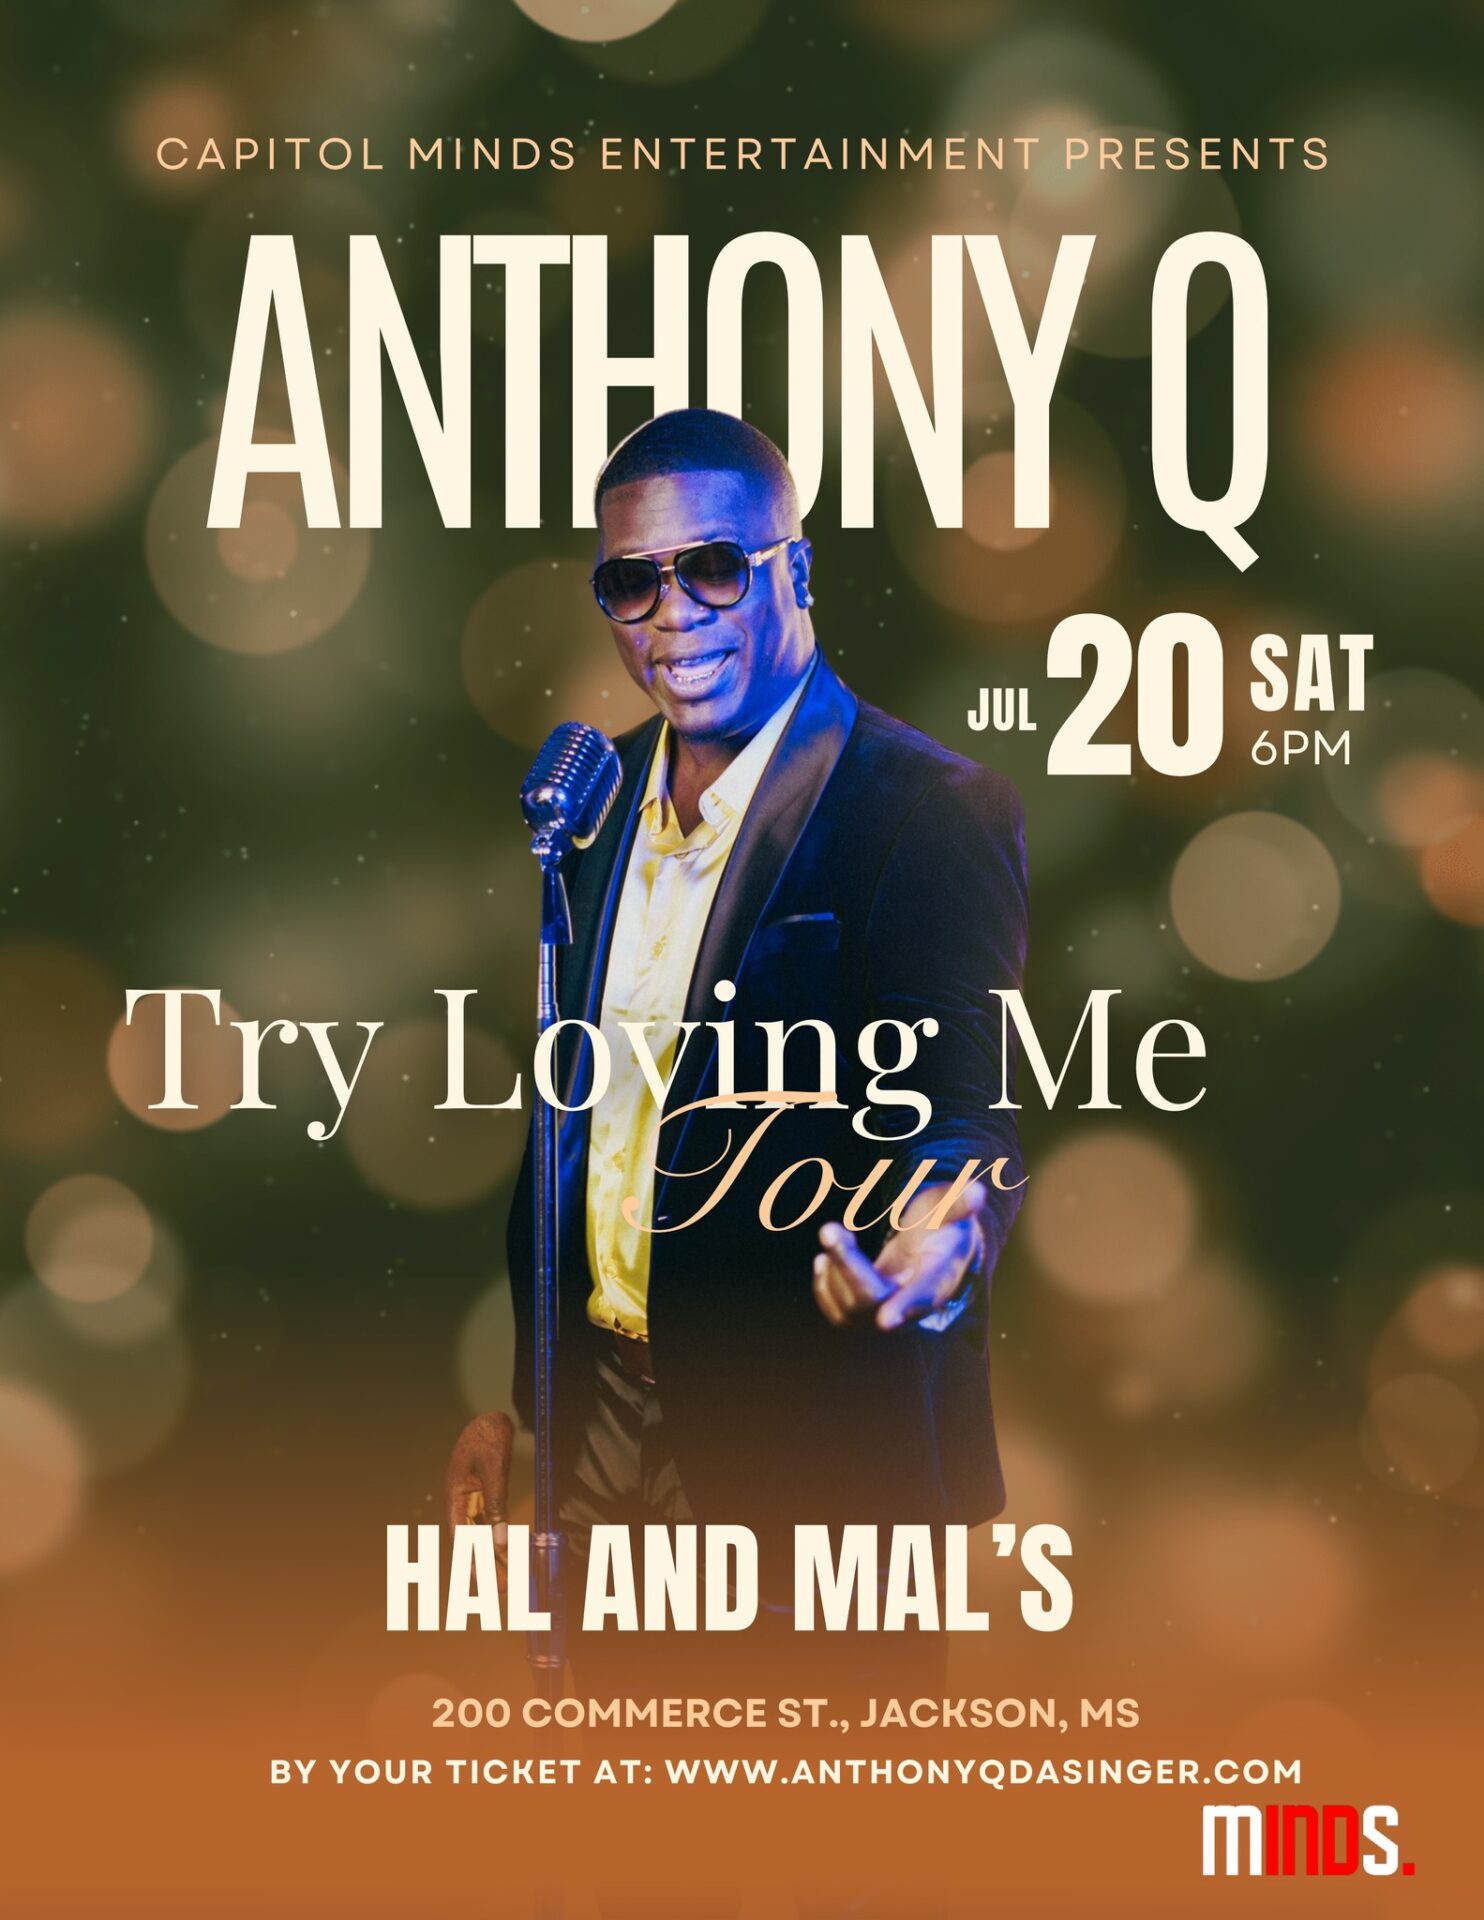 Hal & Mal’s presents Anthony Q: Try Loving Me Tour